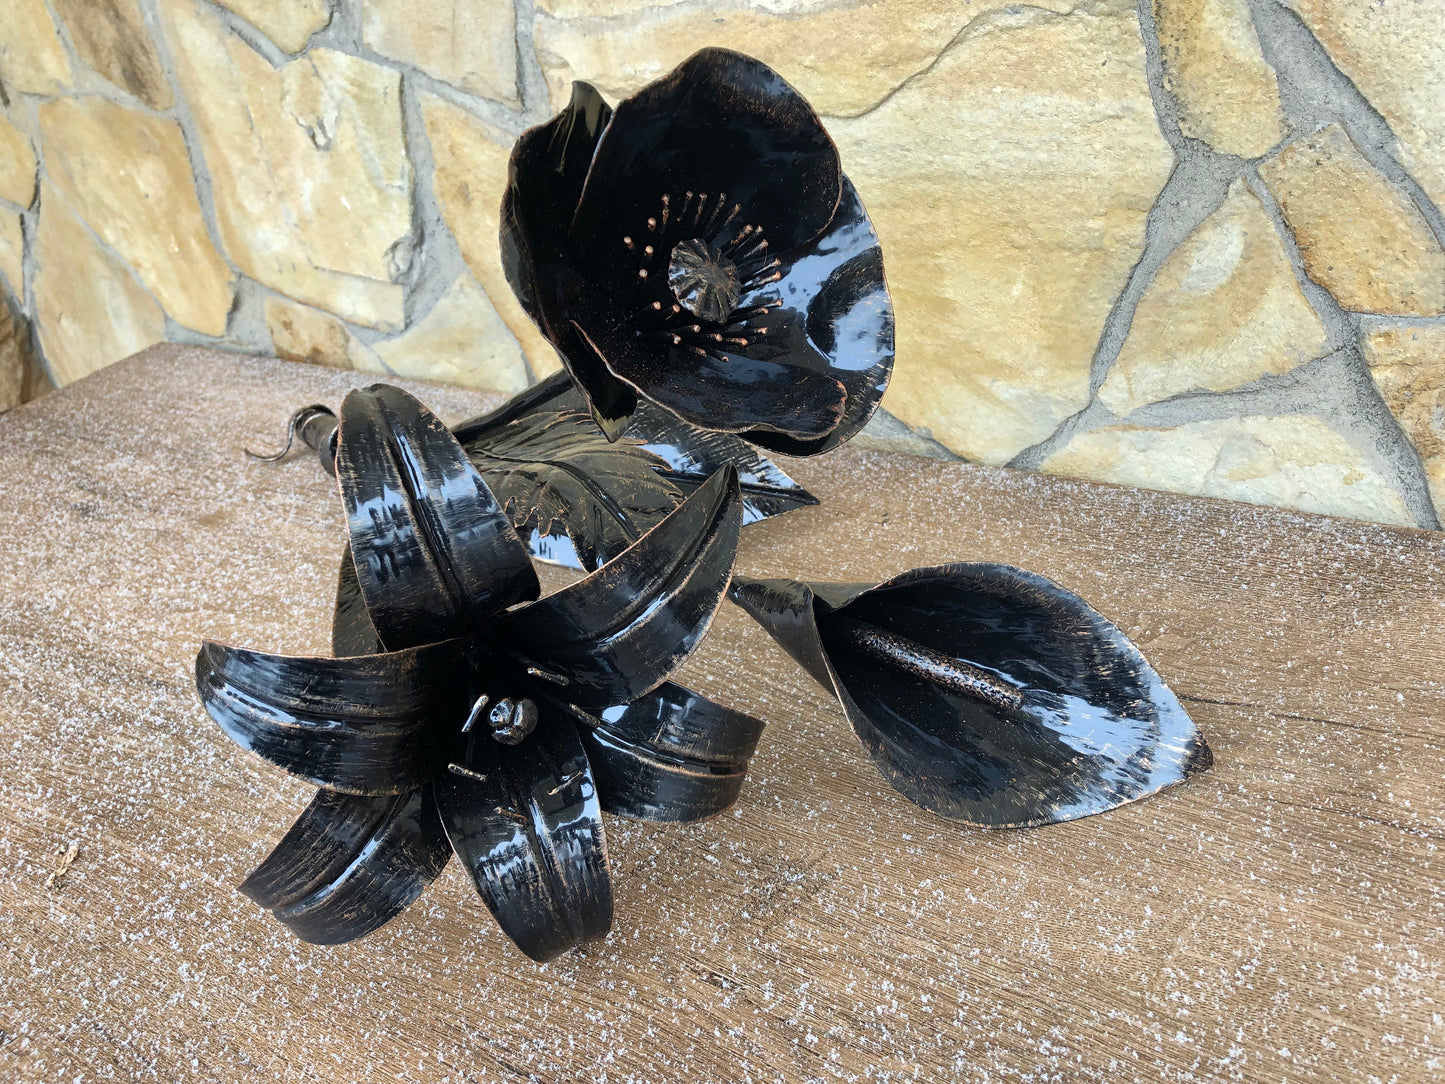 Wedding bouquet, hand forged bouquet, bouquet of flowers, iron bouquet, floral decor, gift idea wedding, poppy, calla, lily, wedding gift